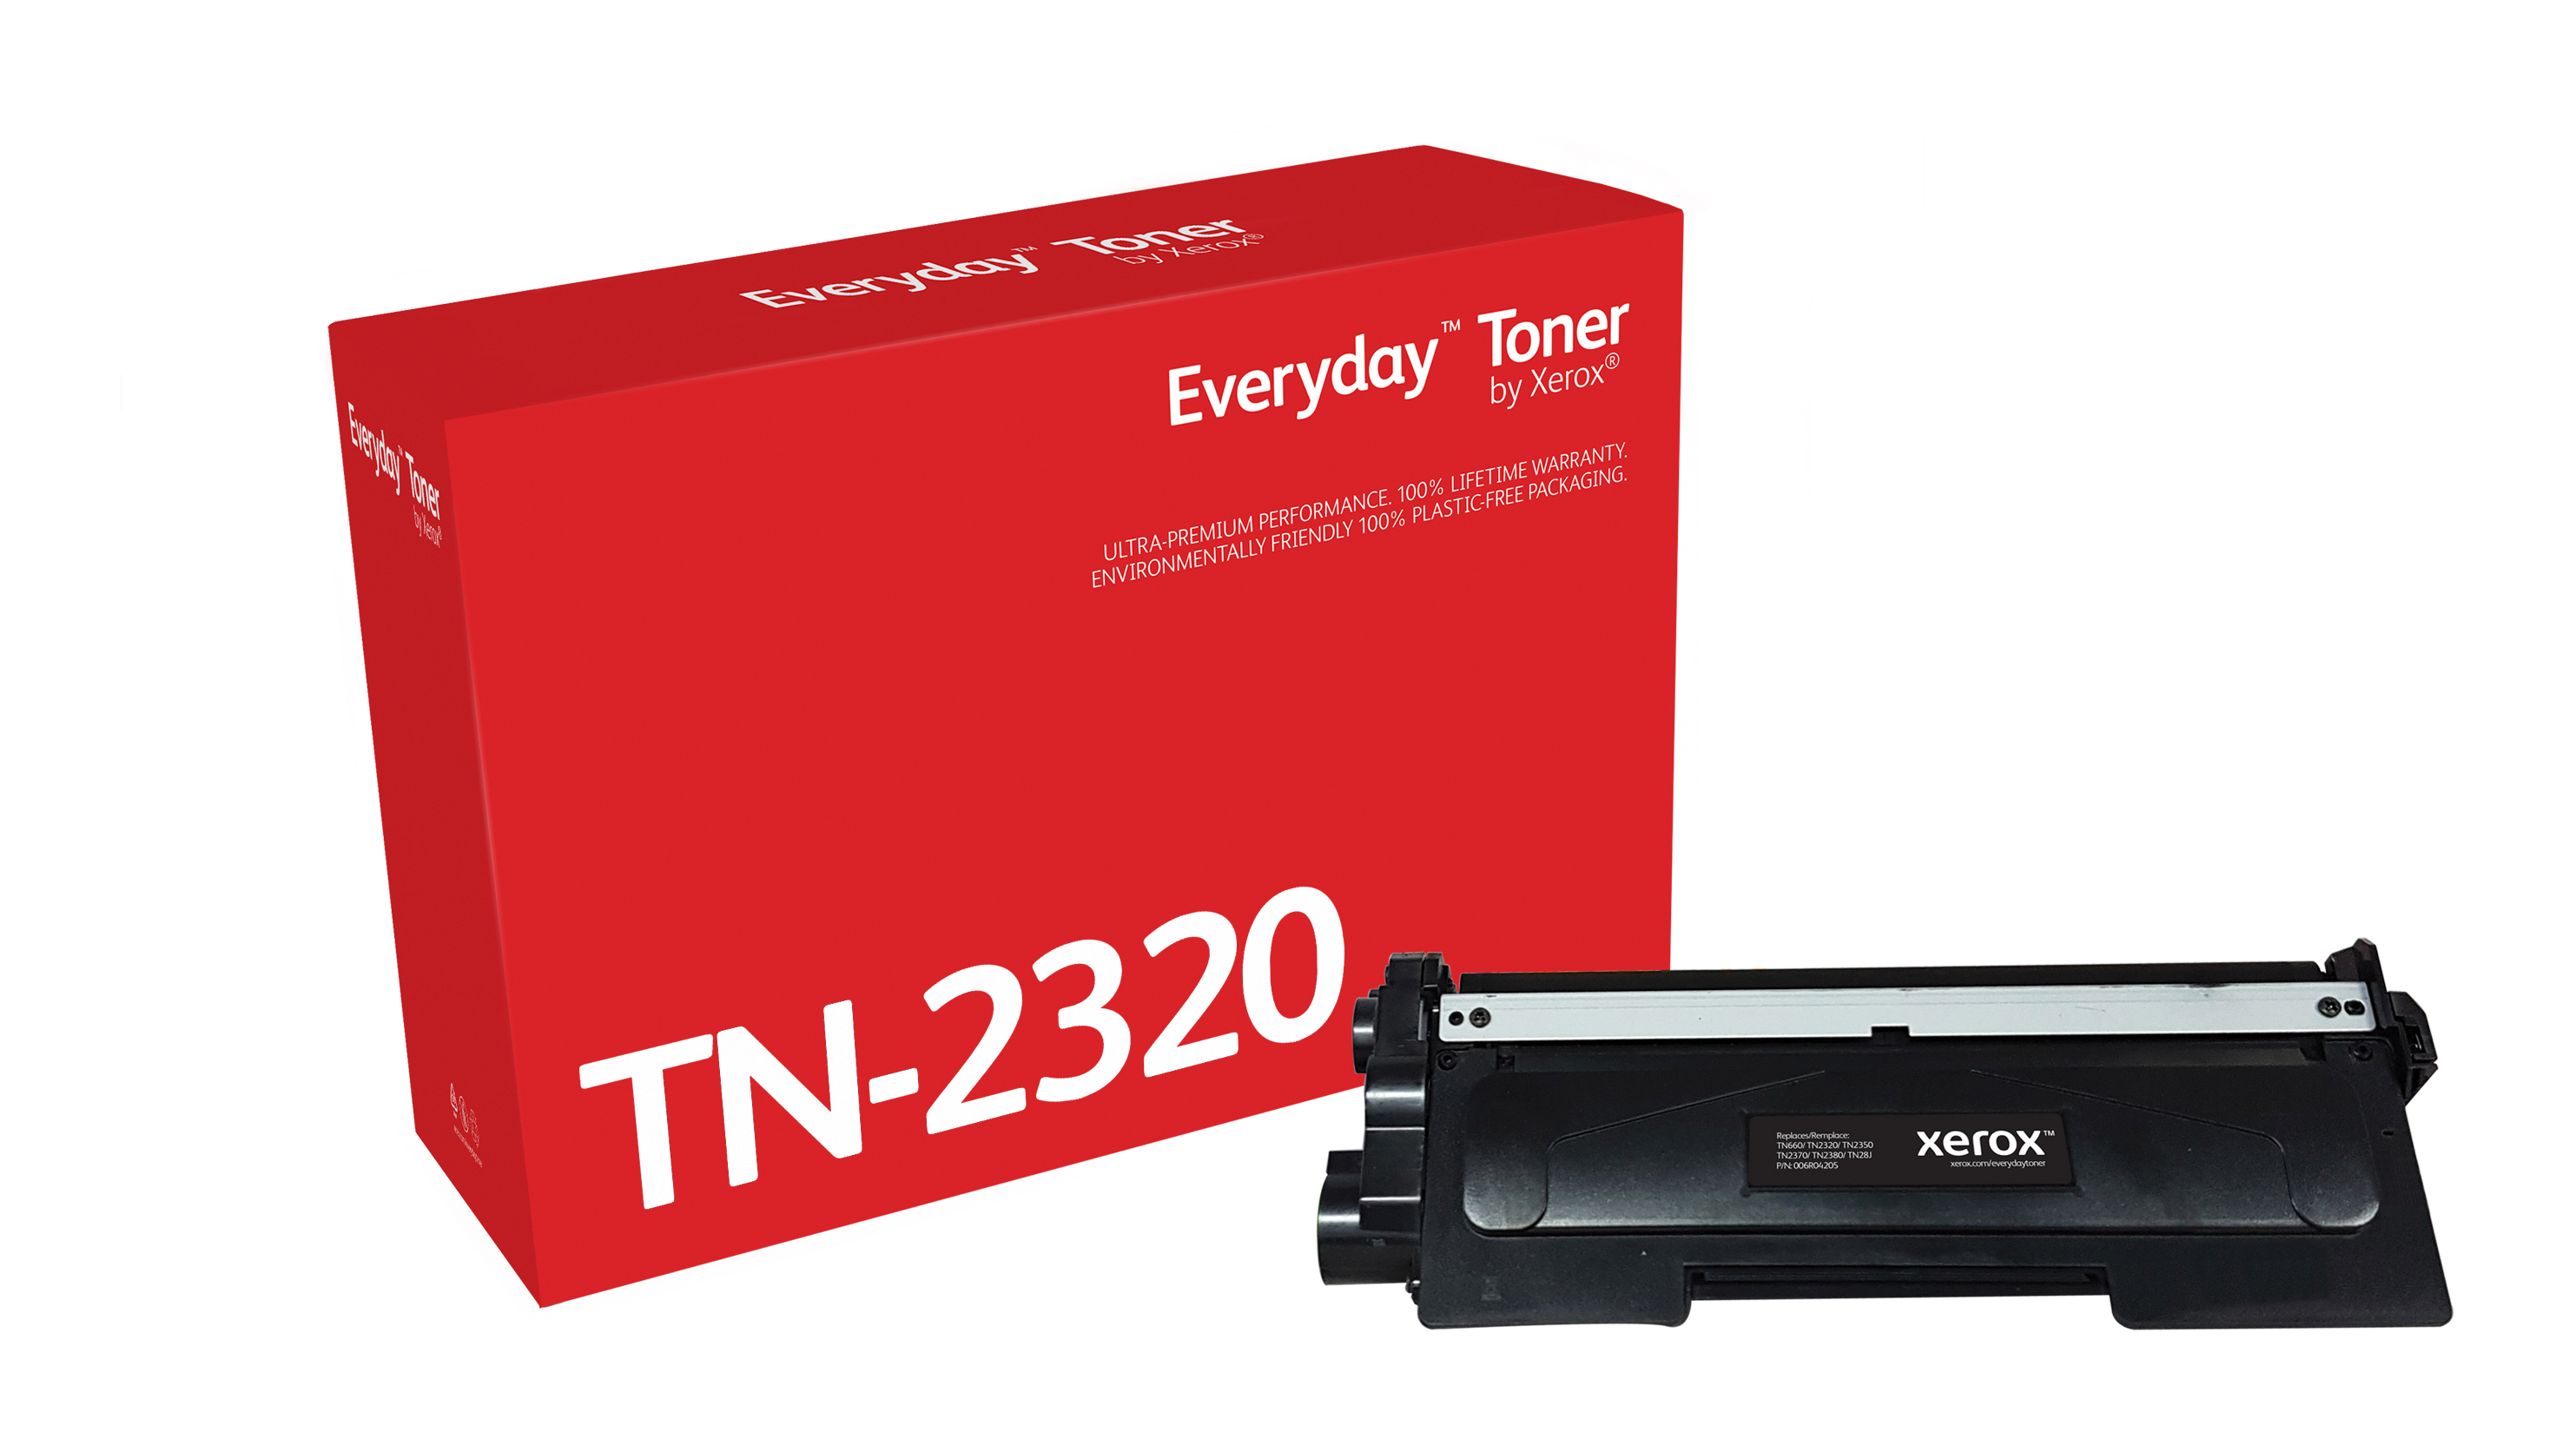 Toner Everyday Mono compatible avec Brother TN-2320 006R04205 by Xerox